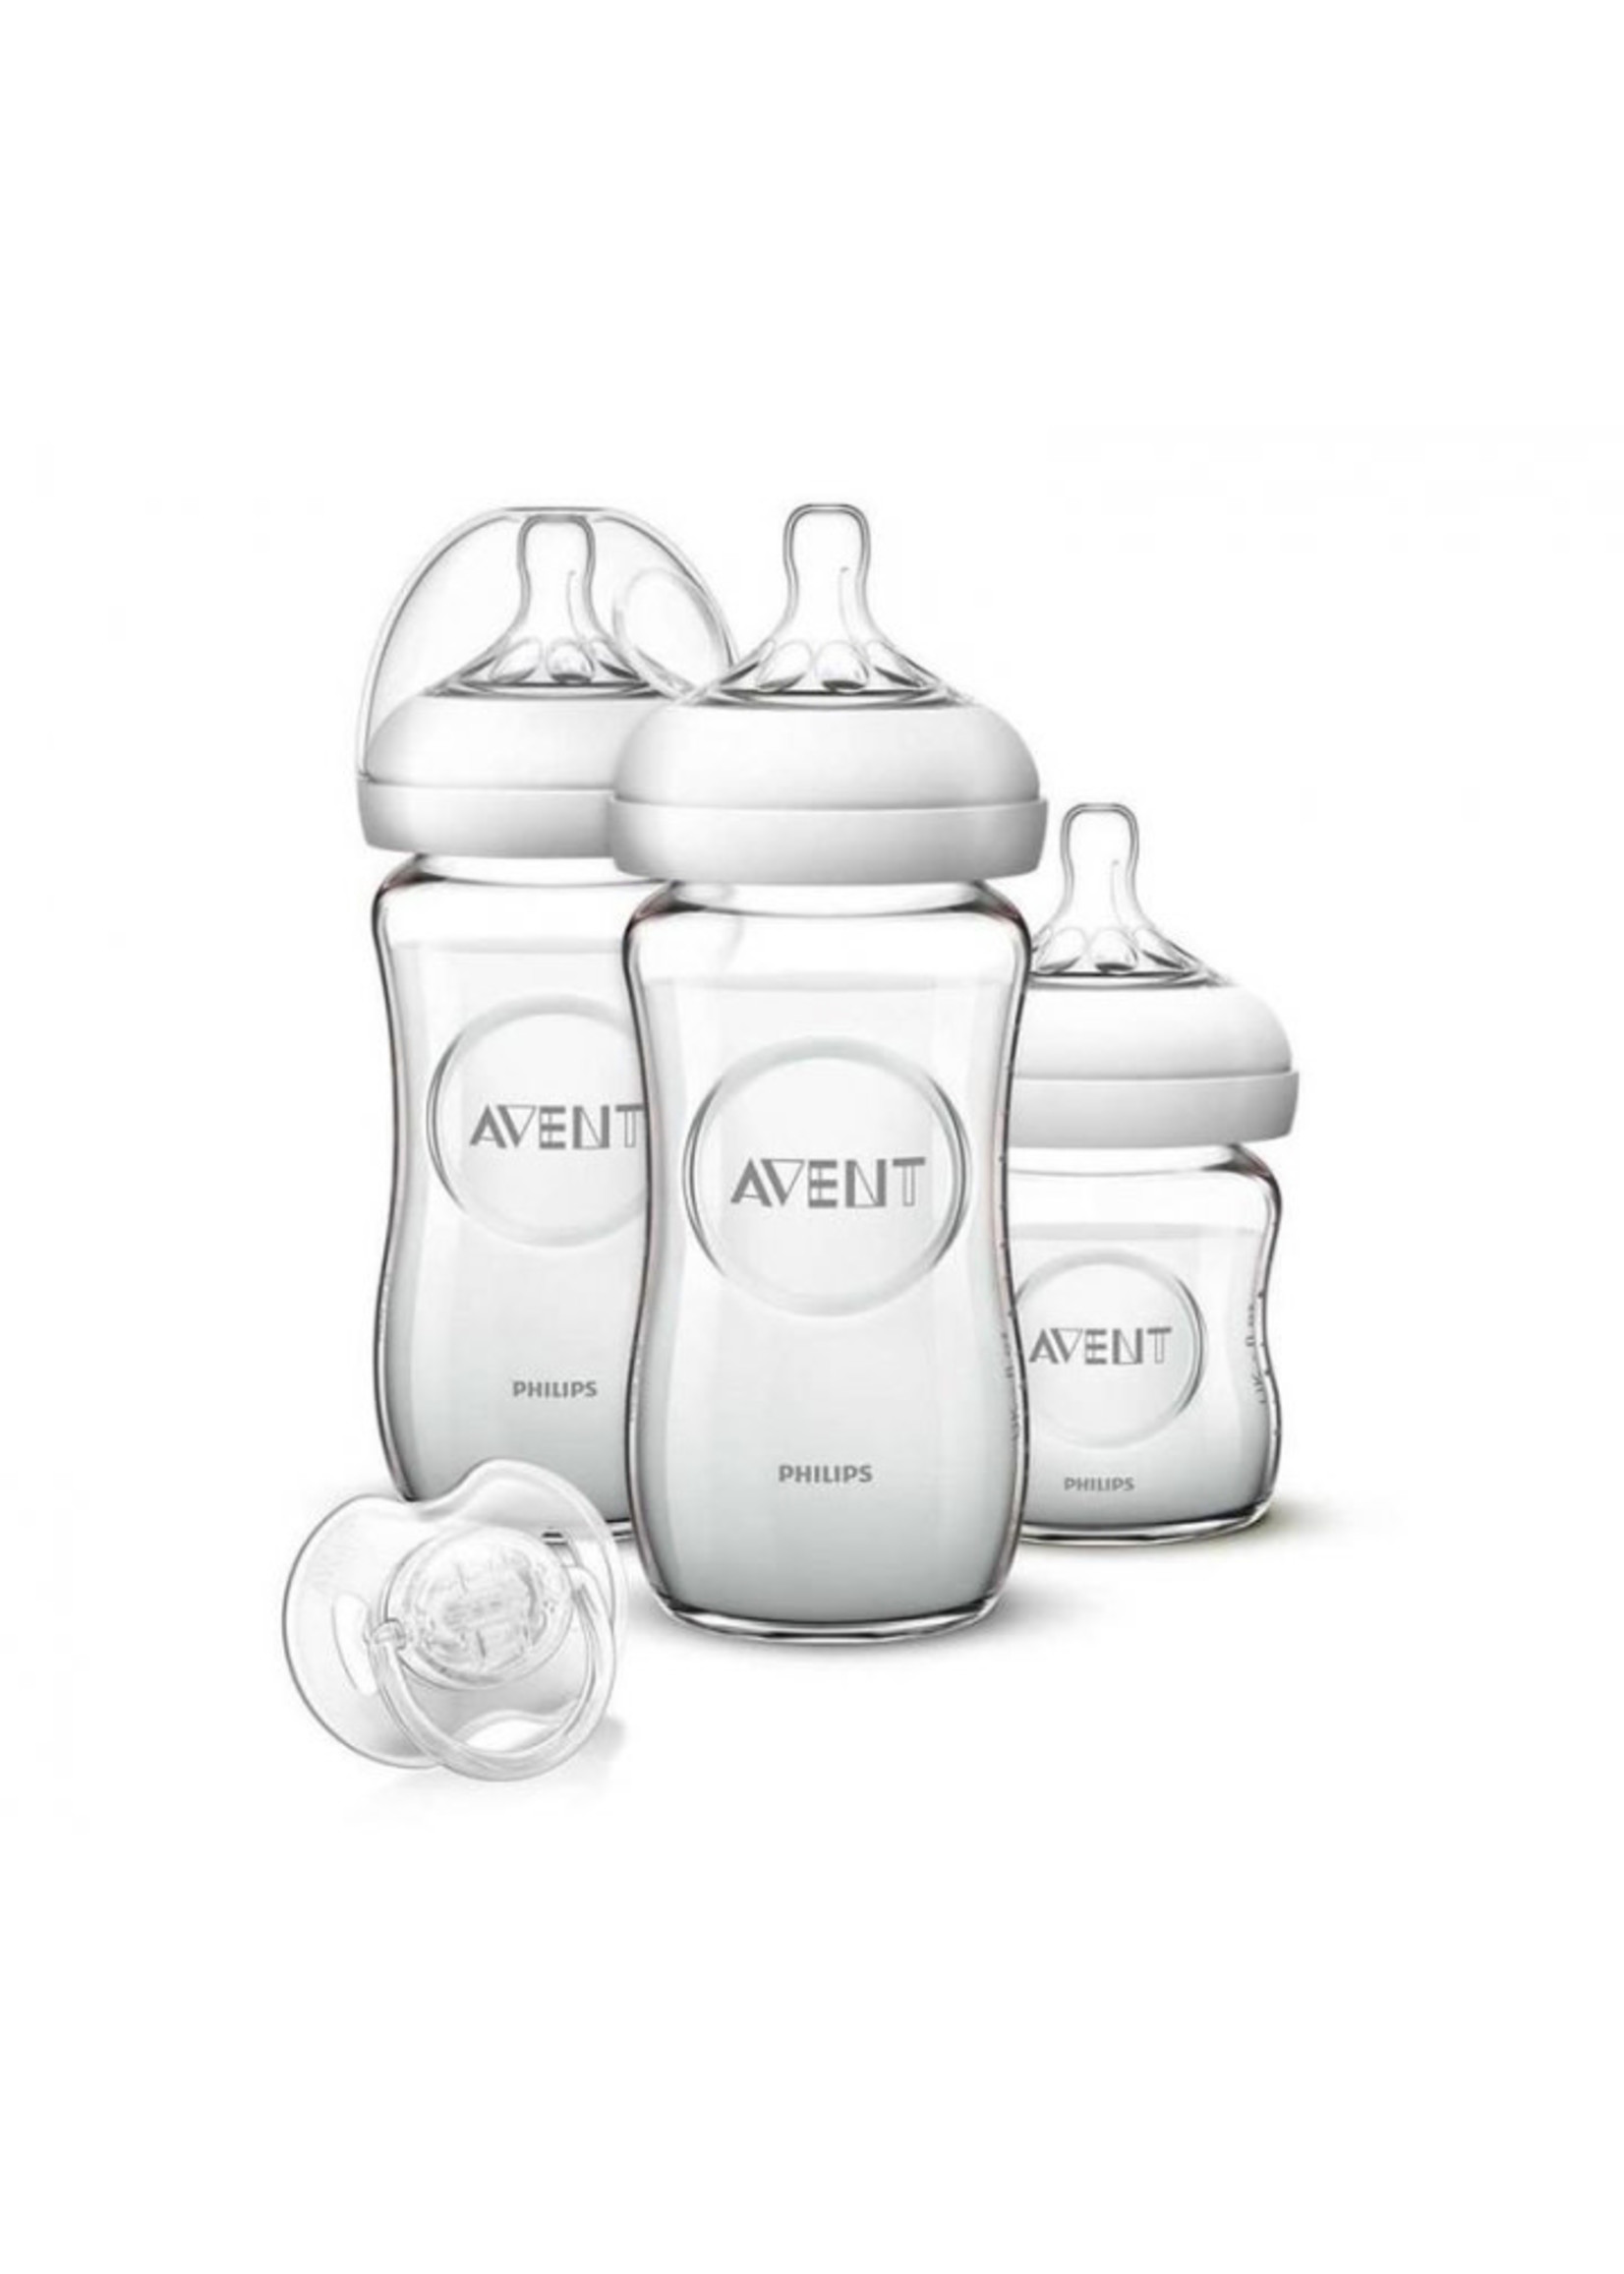 Philips / Avent Avent Natural starterset Glas